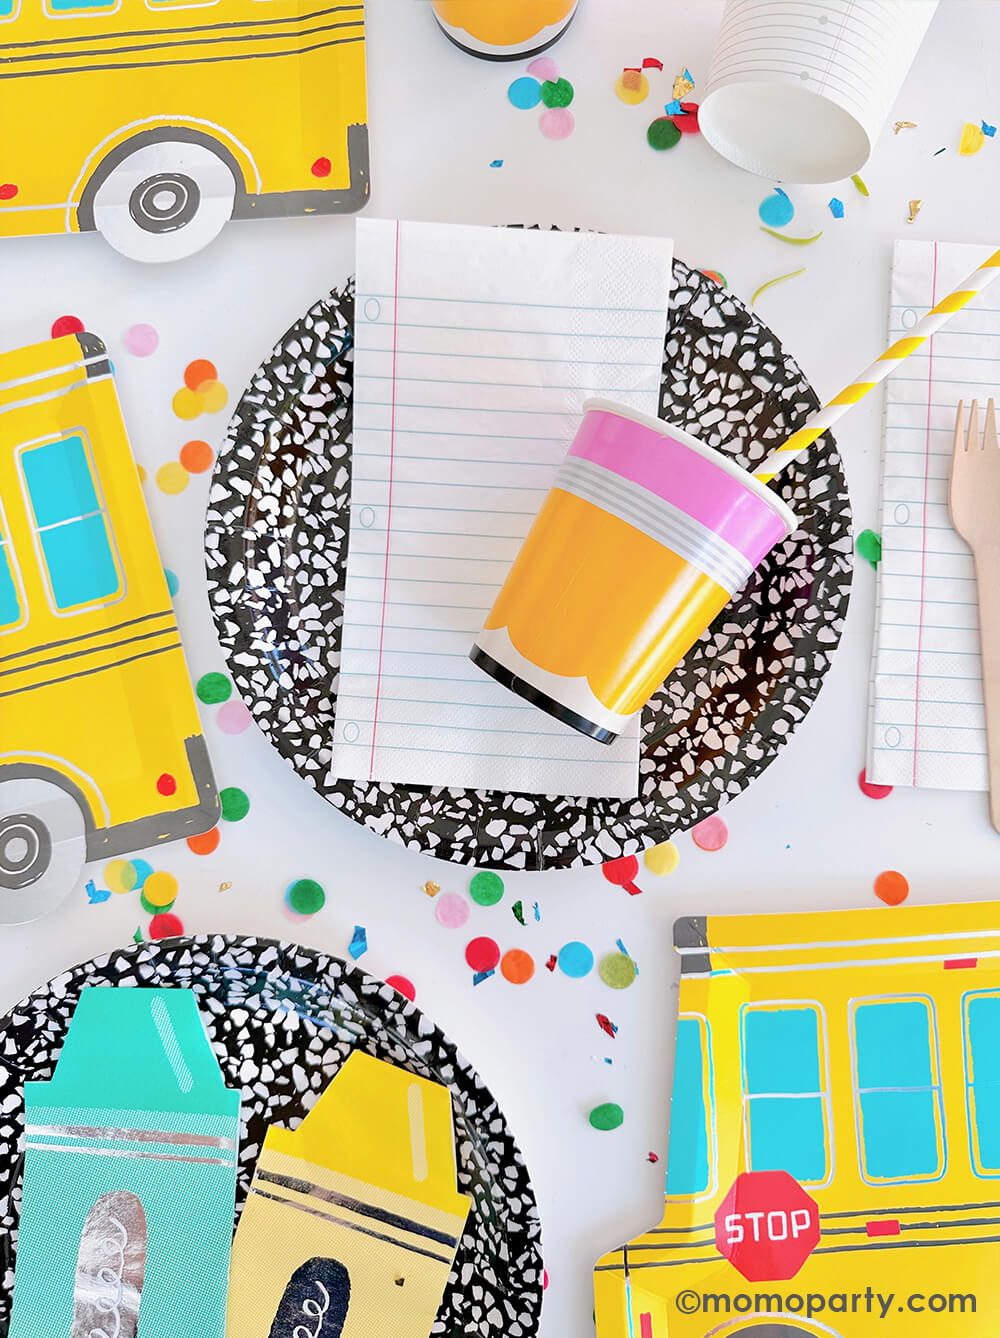 A colorful back to school party tablescape featuring Momo Party's back to school collection including notebook napkins, pencil party cups, school bus shaped plates, colorful crayon shaped napkins on the art book inspired round plates, makes a great inspiration for a school themed celebration including kid's back to school party or first day of school celebration.